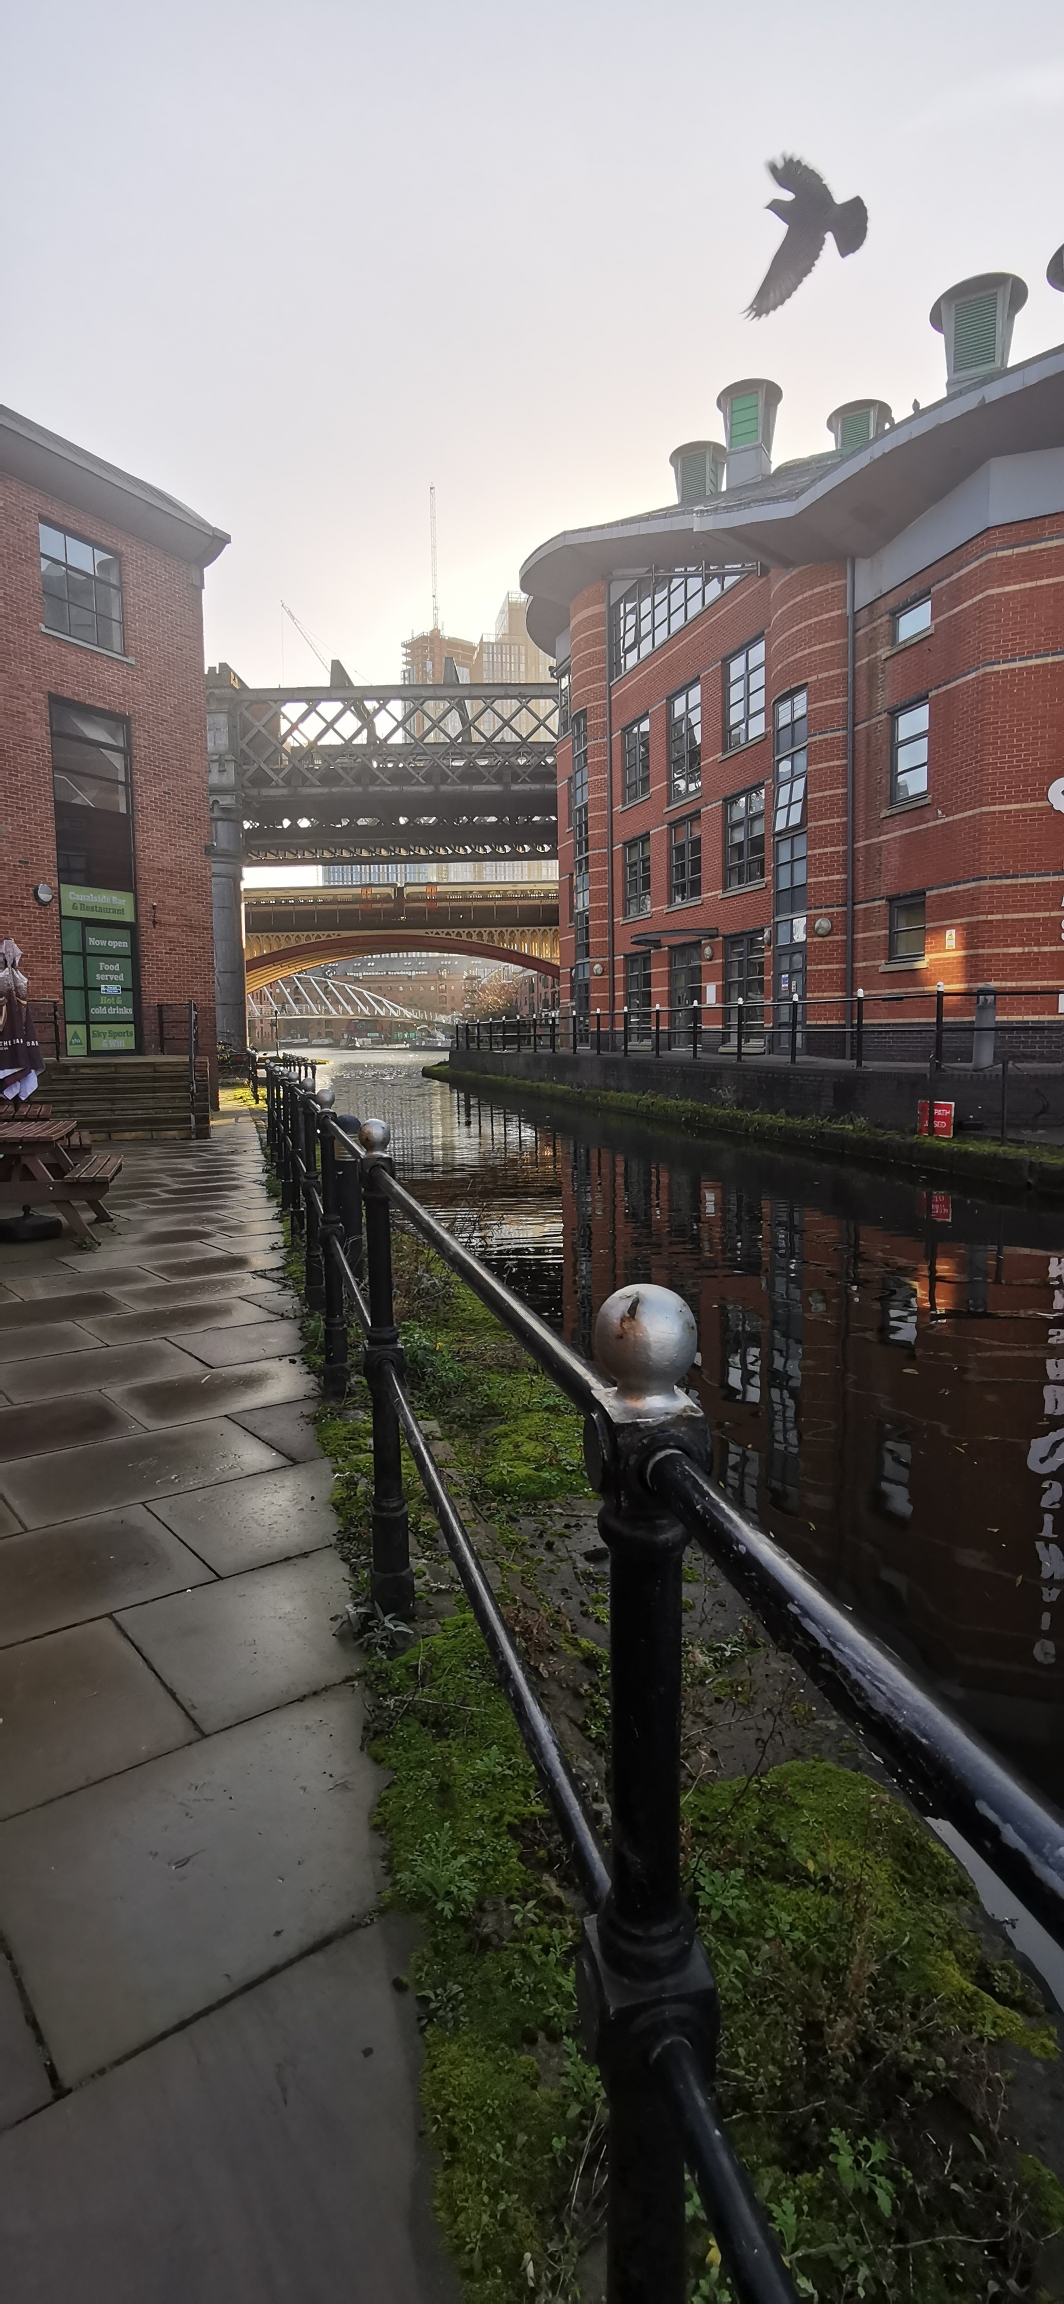 Photo taken between Liverpool Road and Giant's Basin